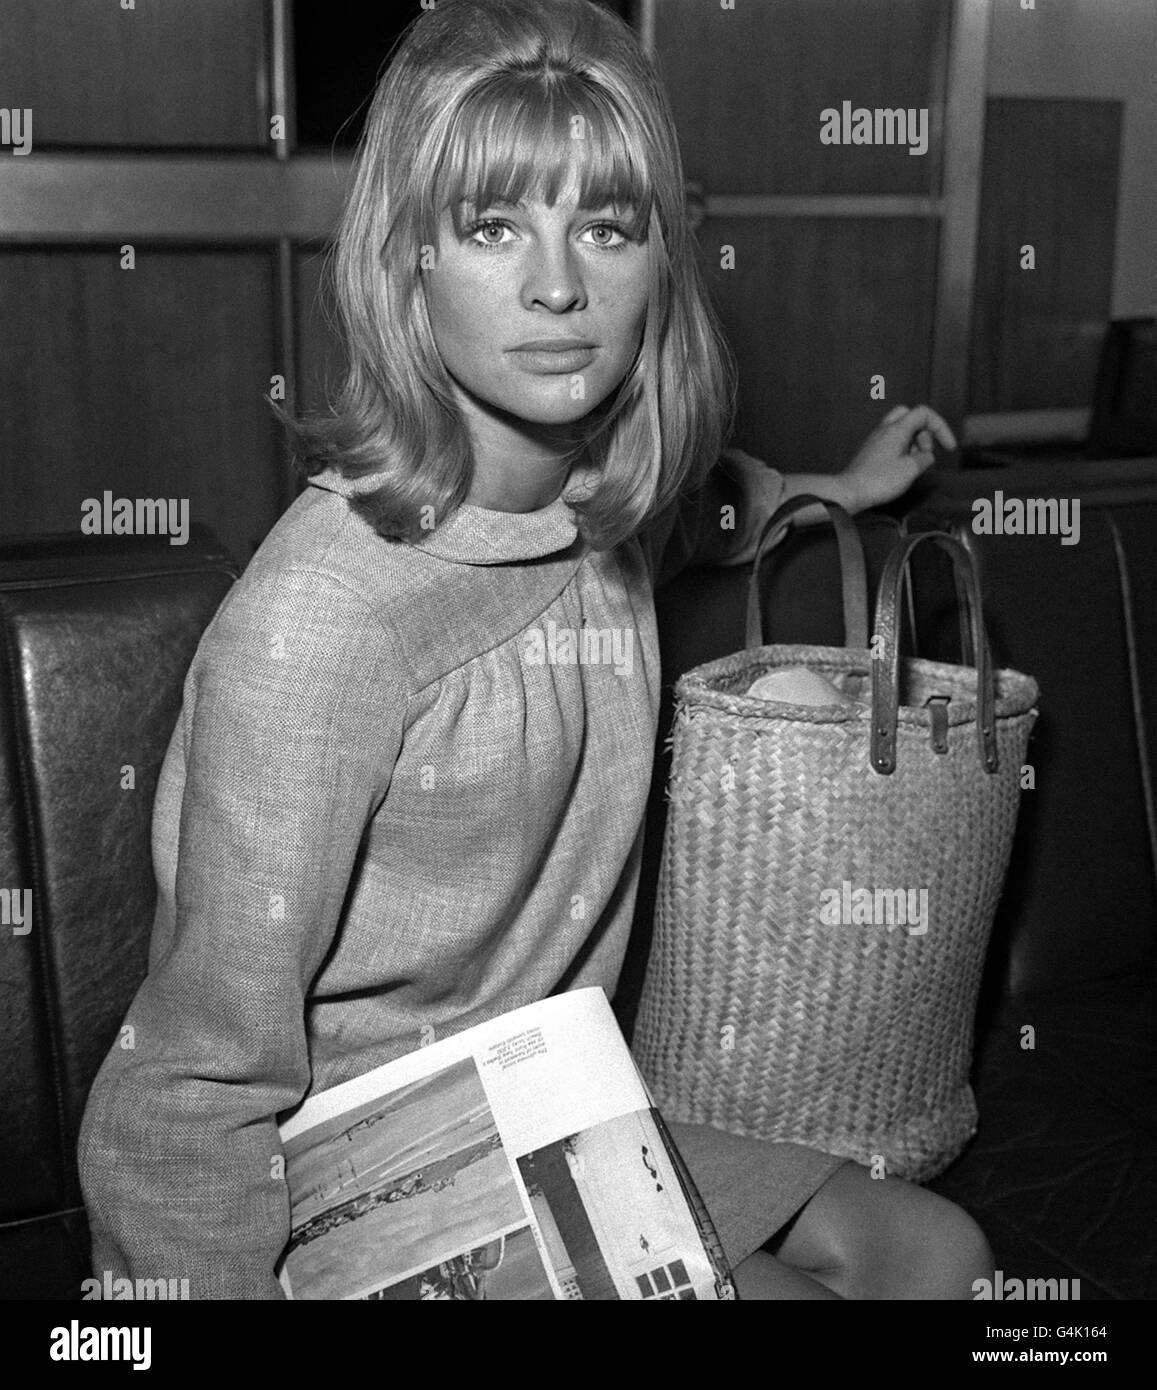 Julie Christie - London Airport. Actress Julie Christie at London Airport before leaving for a holiday in Madrid, Spain. Stock Photo